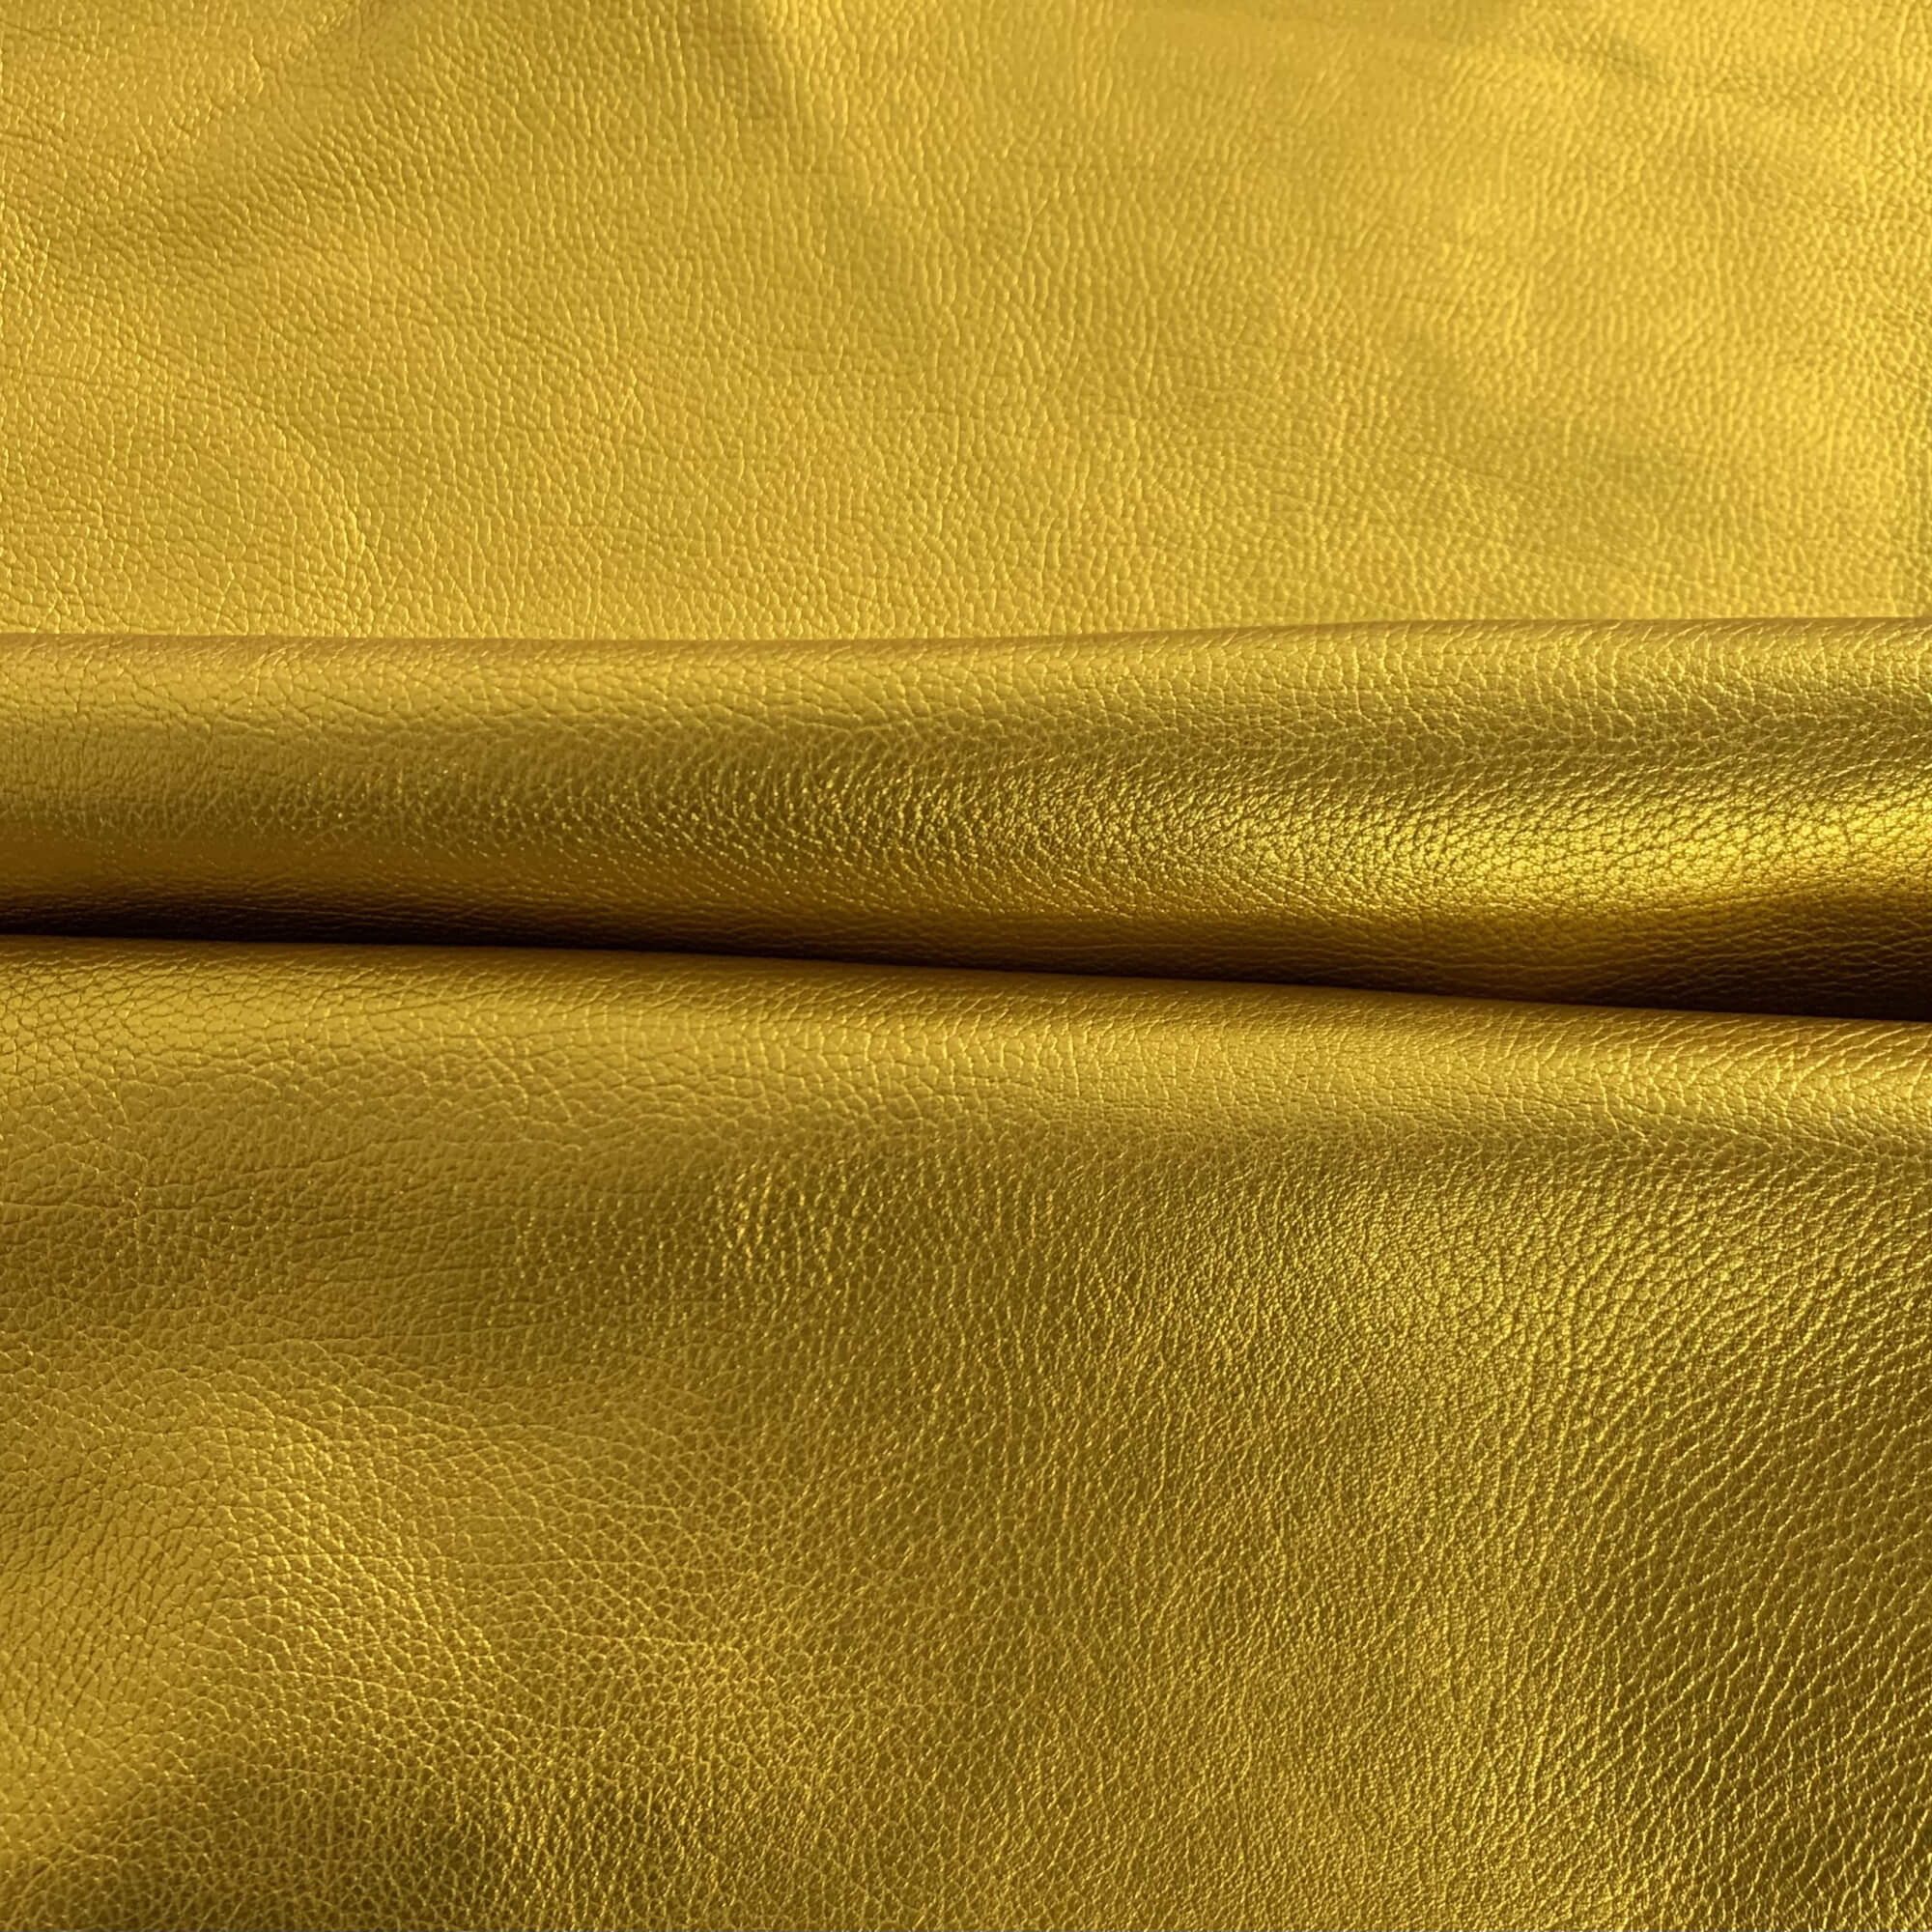 Metallic Gold leather for crafts and sewing